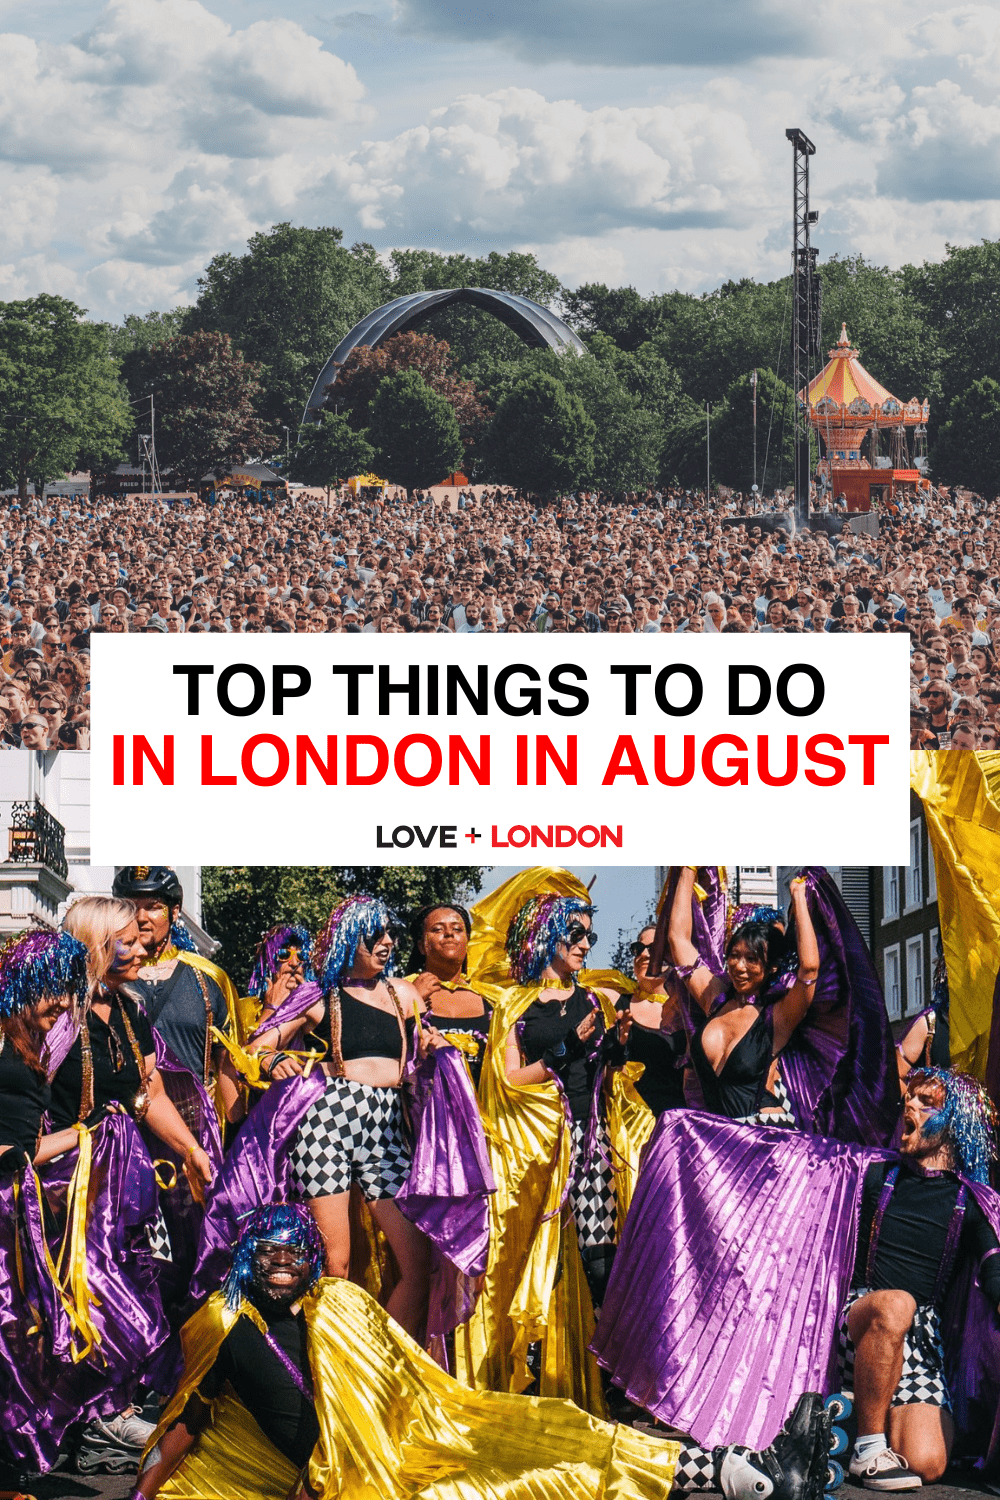 Top Things To Do in London in August